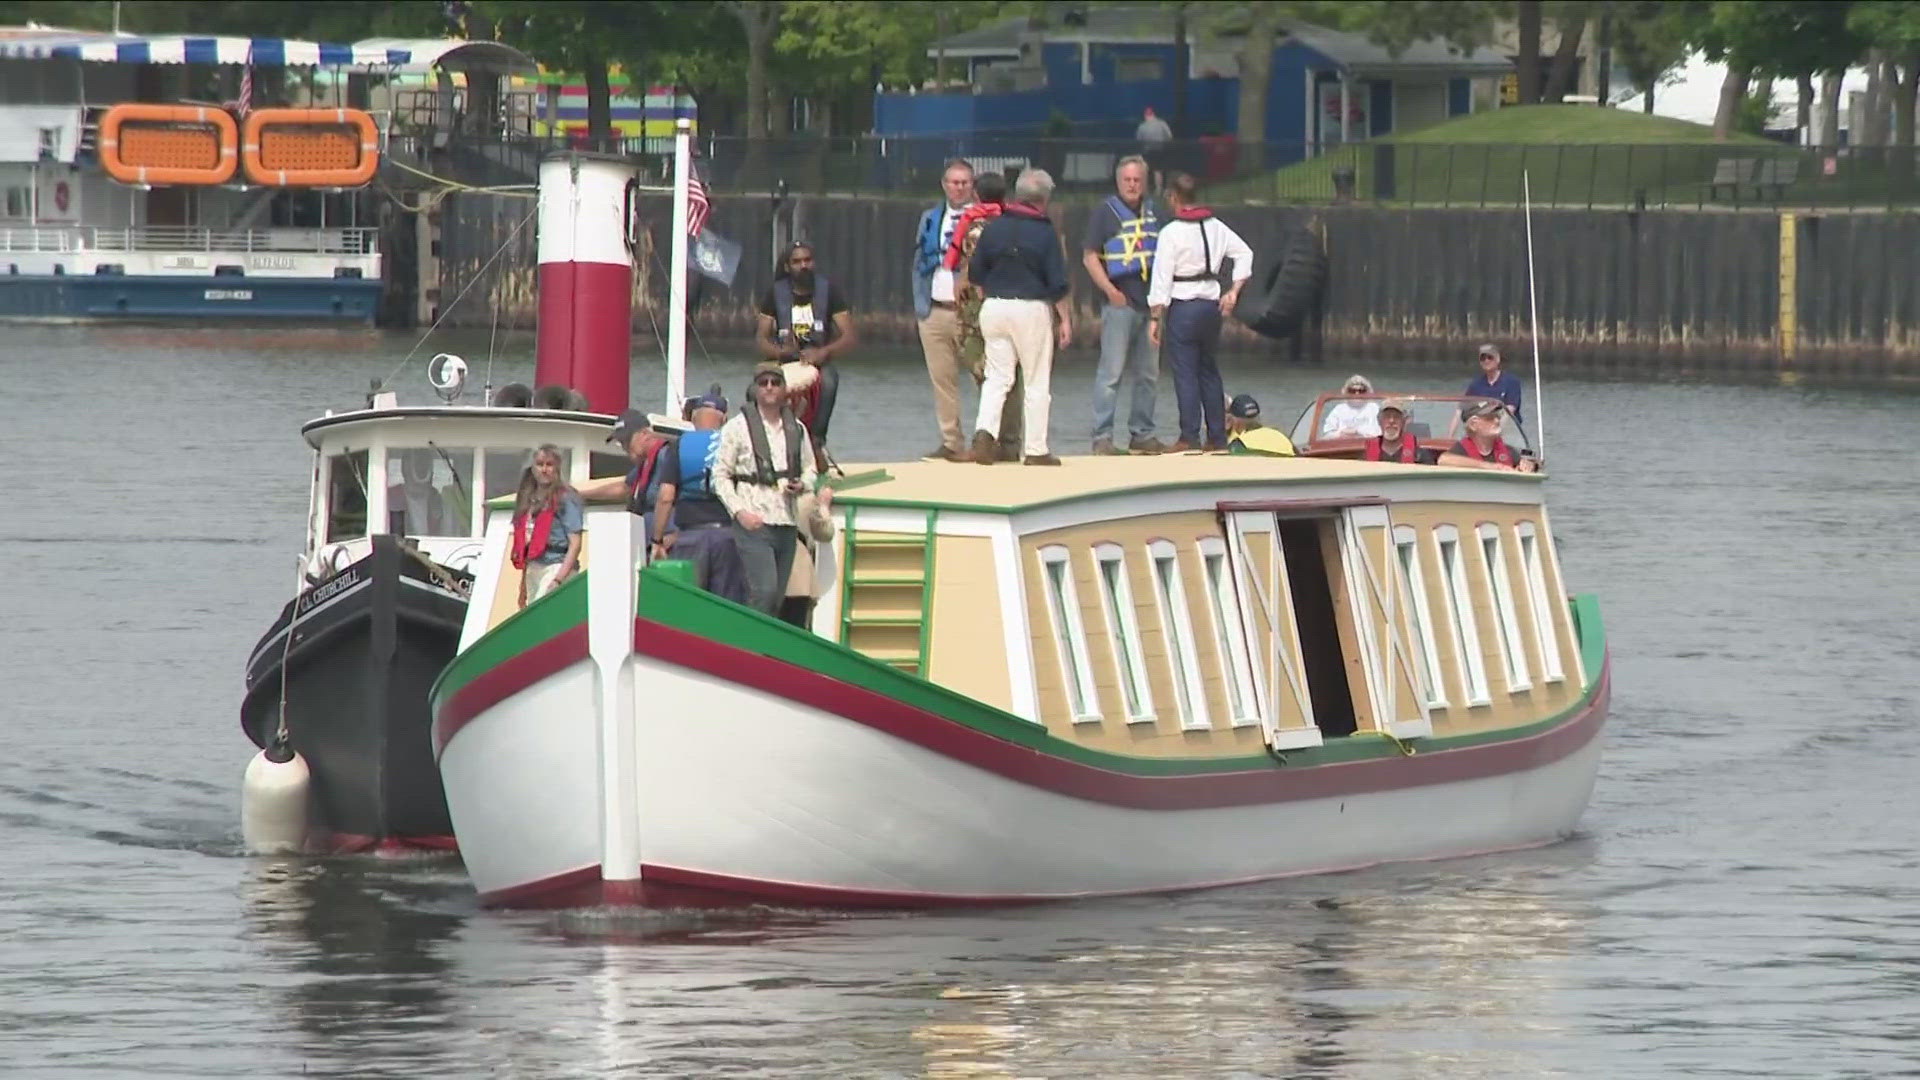 The Buffalo Maritime Center spent four years constructing the full-sized Erie Canal replica boat in the Longshed at Canalside.